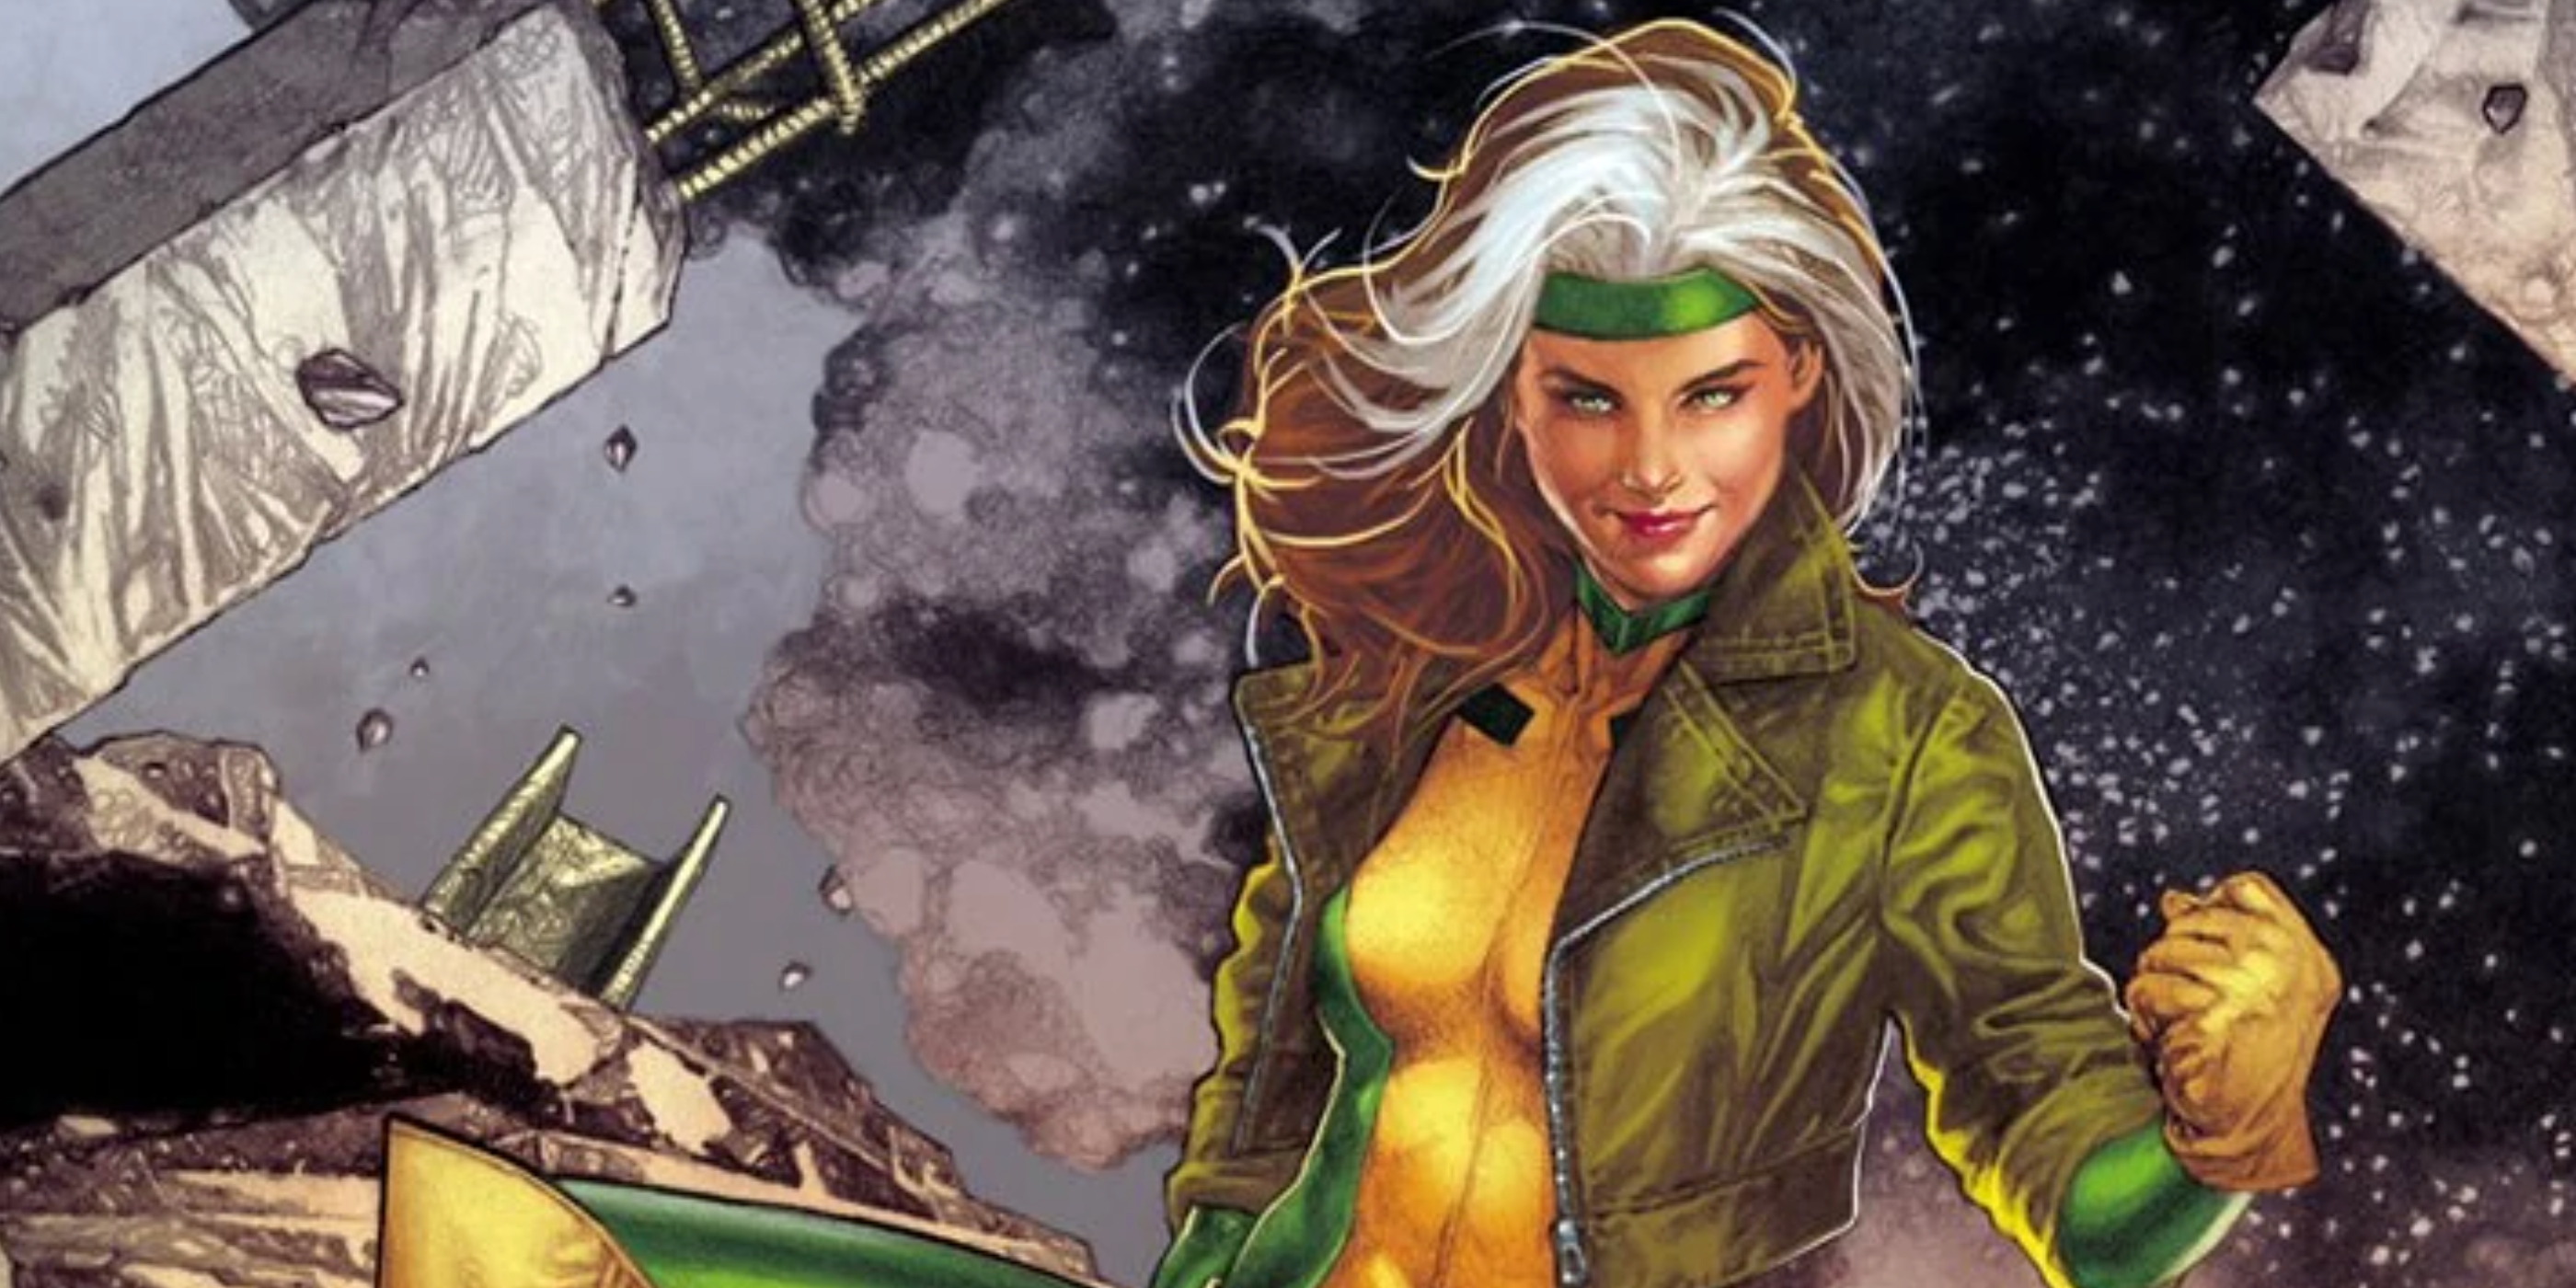 Rogue in Marvel comics stood among rubble